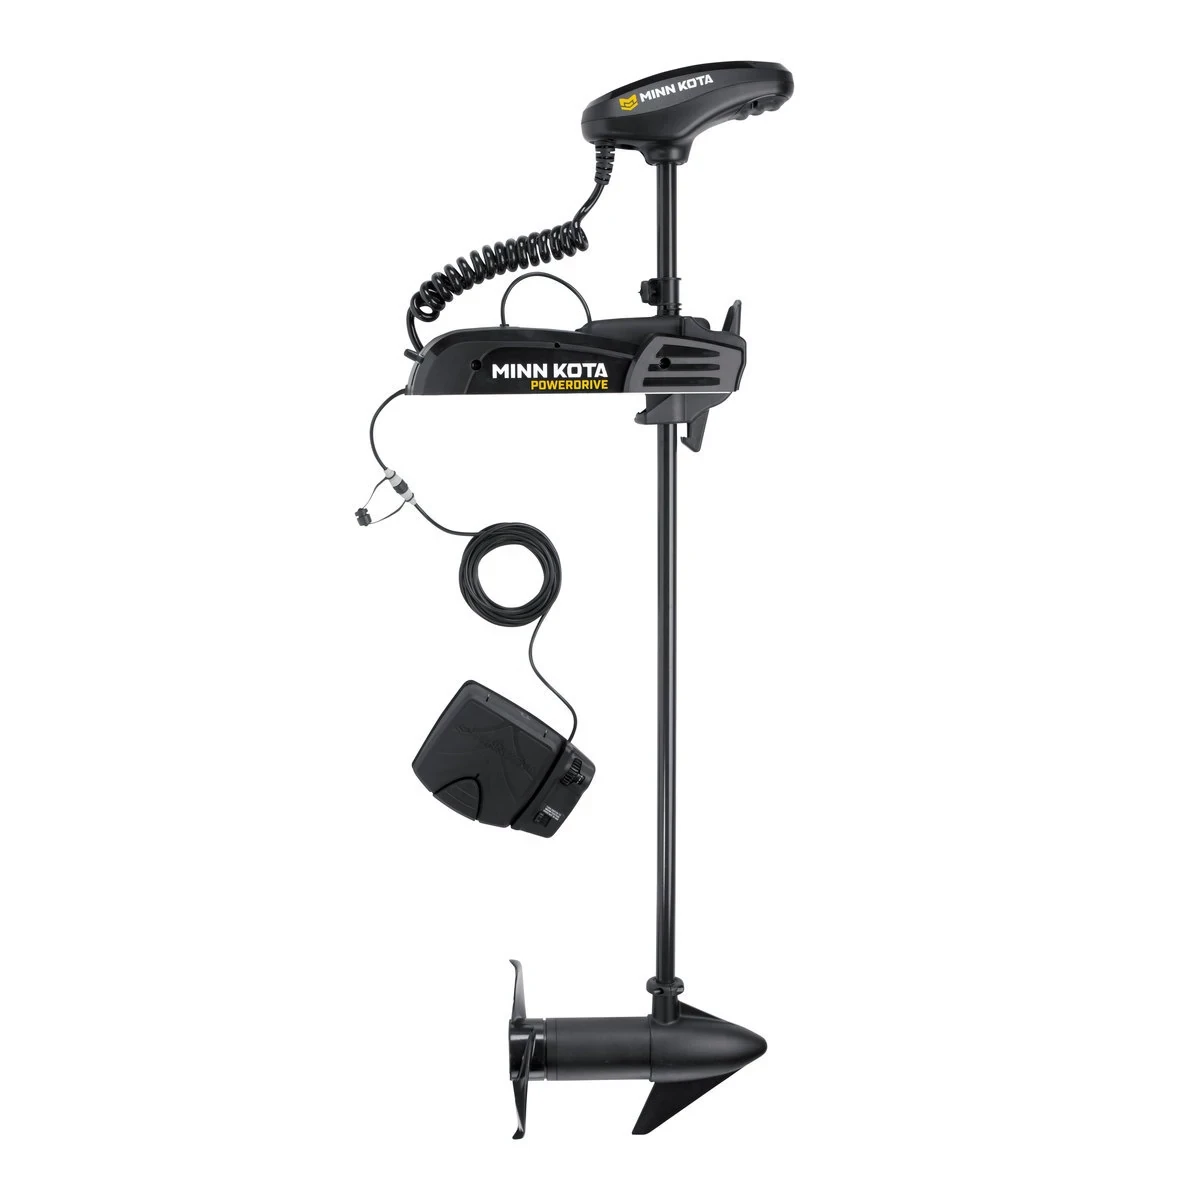 PowerDrive 70 pound thrust trolling motor and foot pedal